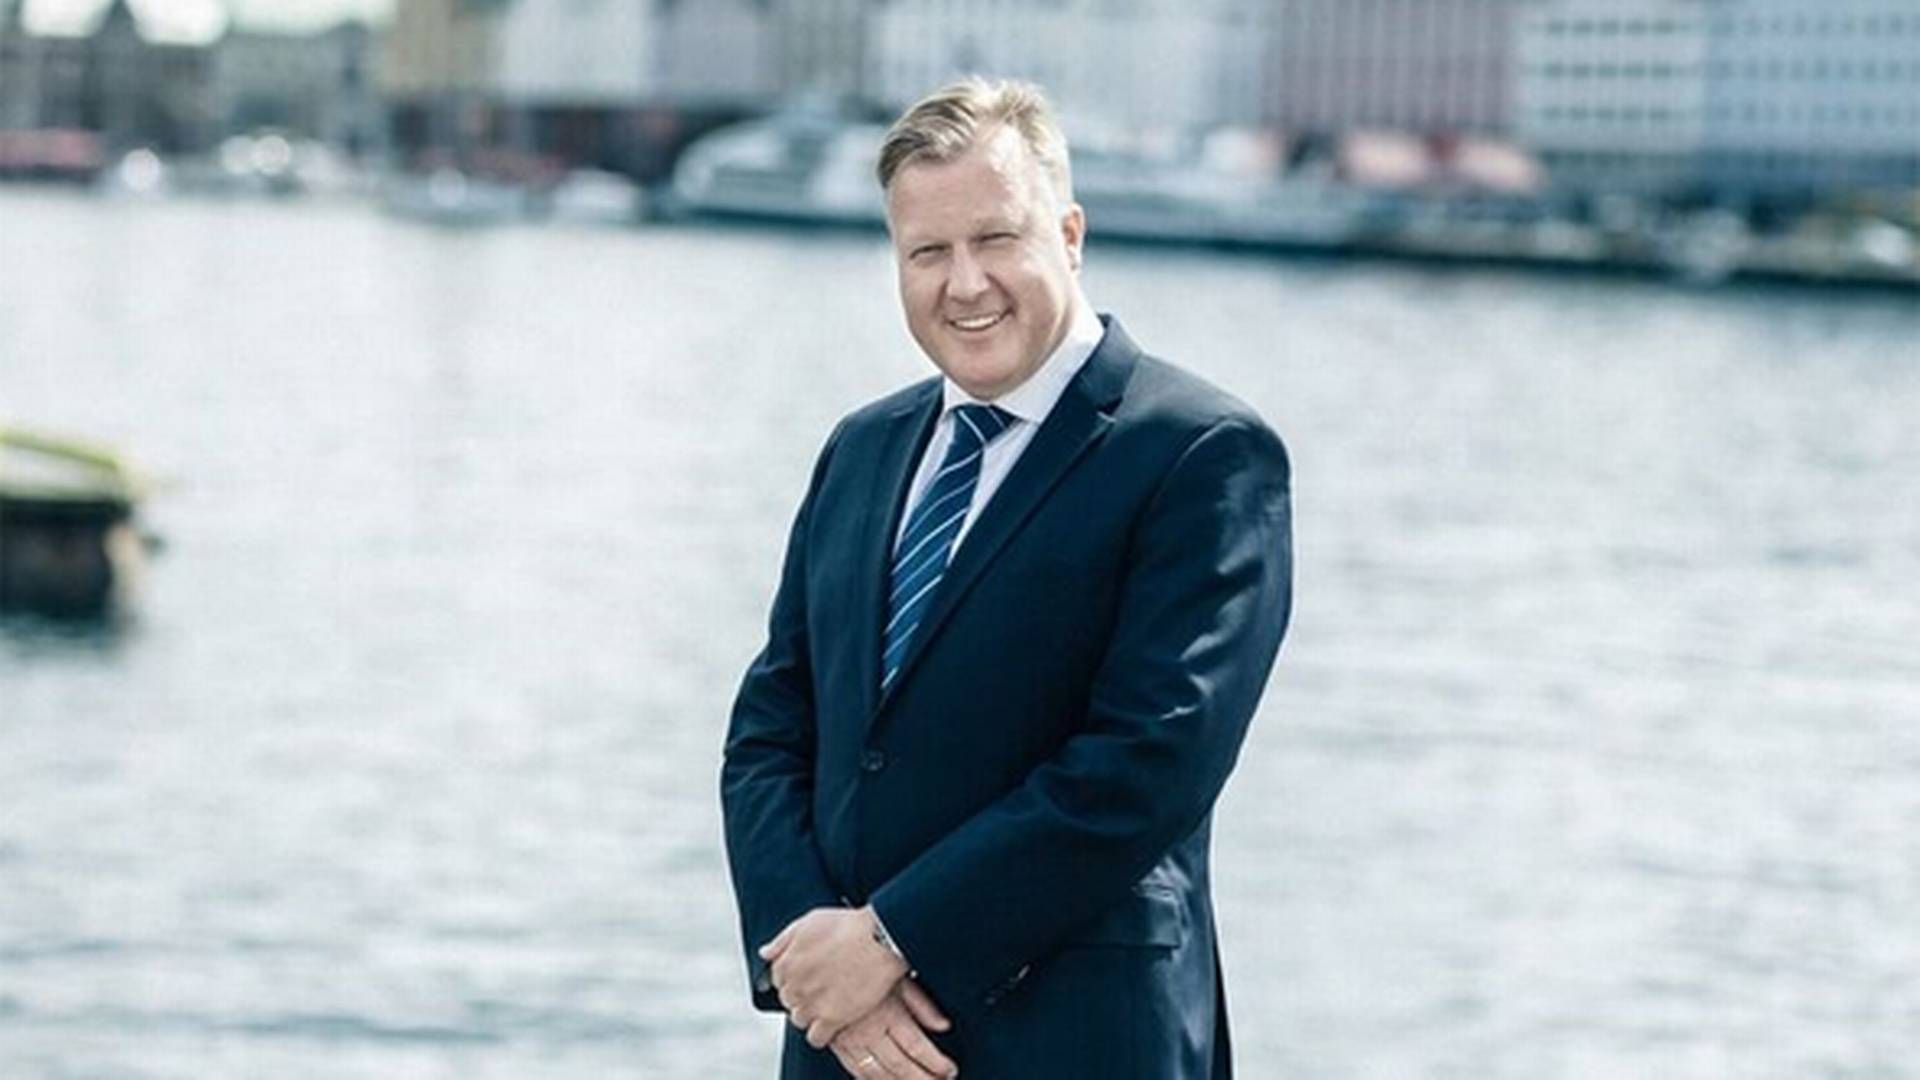 Joachim Høegh-Krohn, CEO at Argentum believes the entire 2018 will be a record year for Nordic buy outs and fund raising.